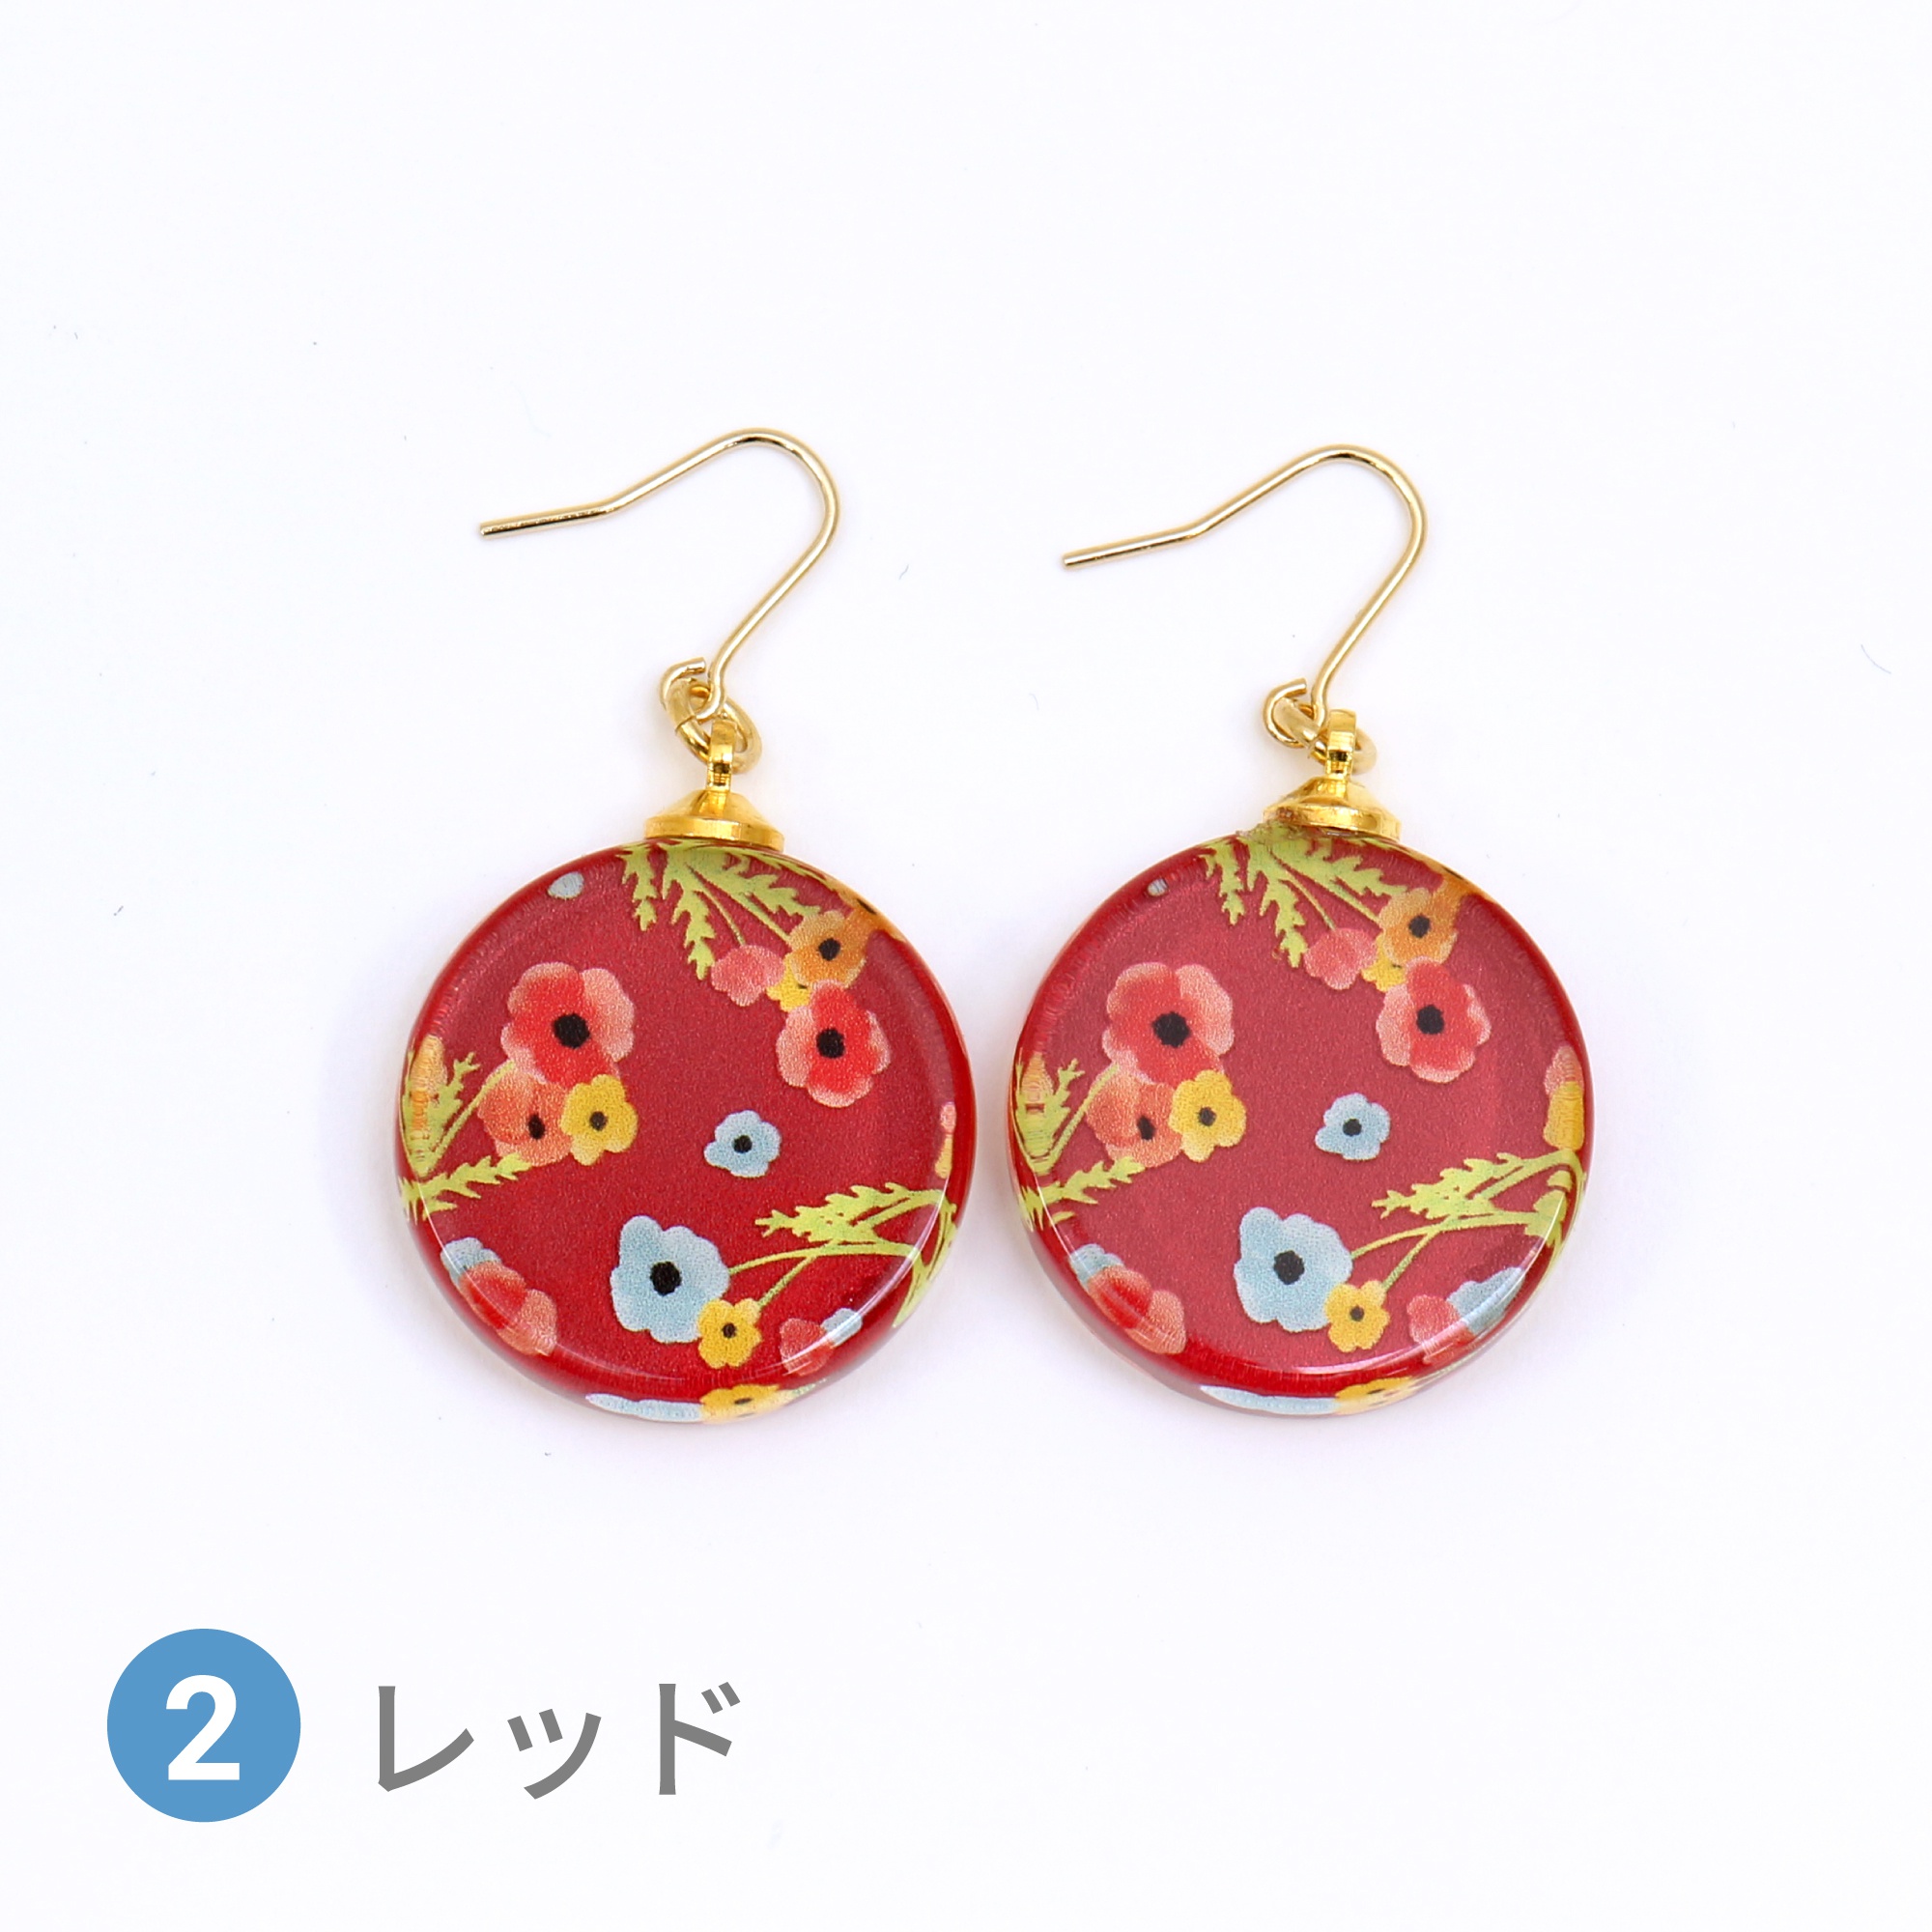 Glass accessories Pierced Earring POPPY red round shape